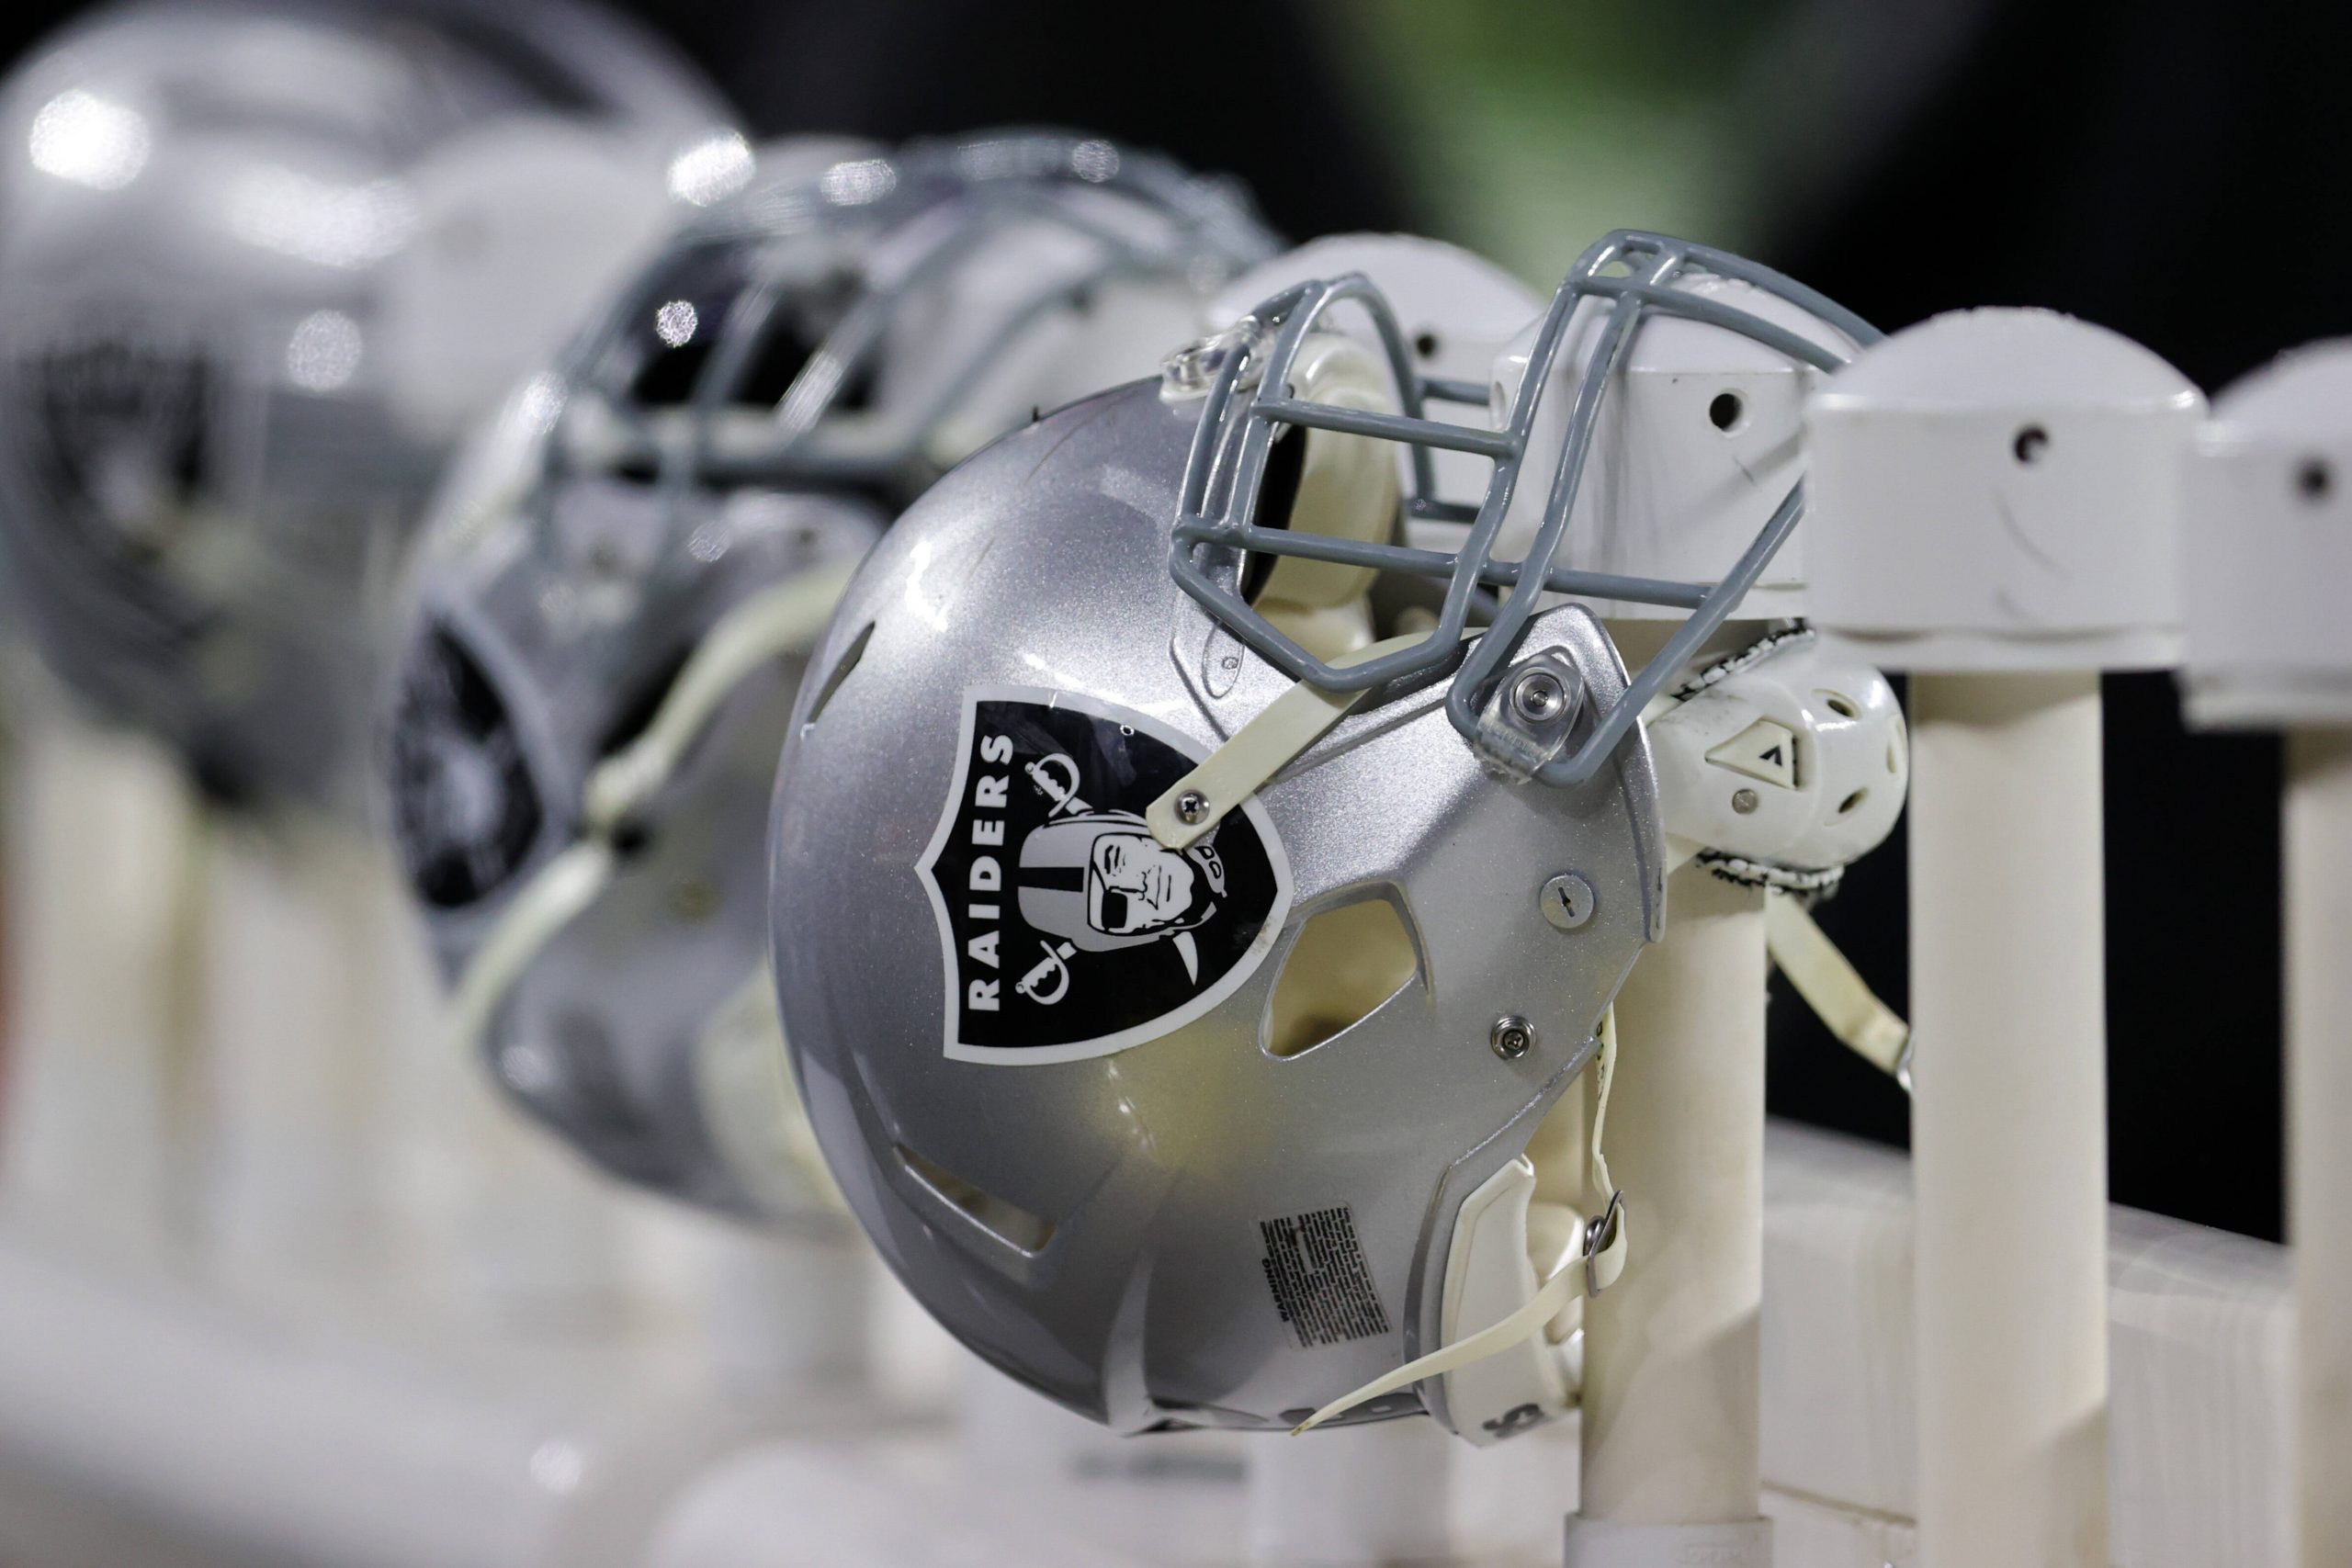 CLEVELAND, OH - DECEMBER 20: A Las Vegas Raiders helmet on the sideline during the fourth quarter of the National Football League game between the Las Vegas Raiders and Cleveland Browns on December 20, 2021, at FirstEnergy Stadium in Cleveland, OH. Photo by Frank Jansky/Icon Sportswire NFL, American Football Herren, USA DEC 20 Raiders at Browns Icon211220131